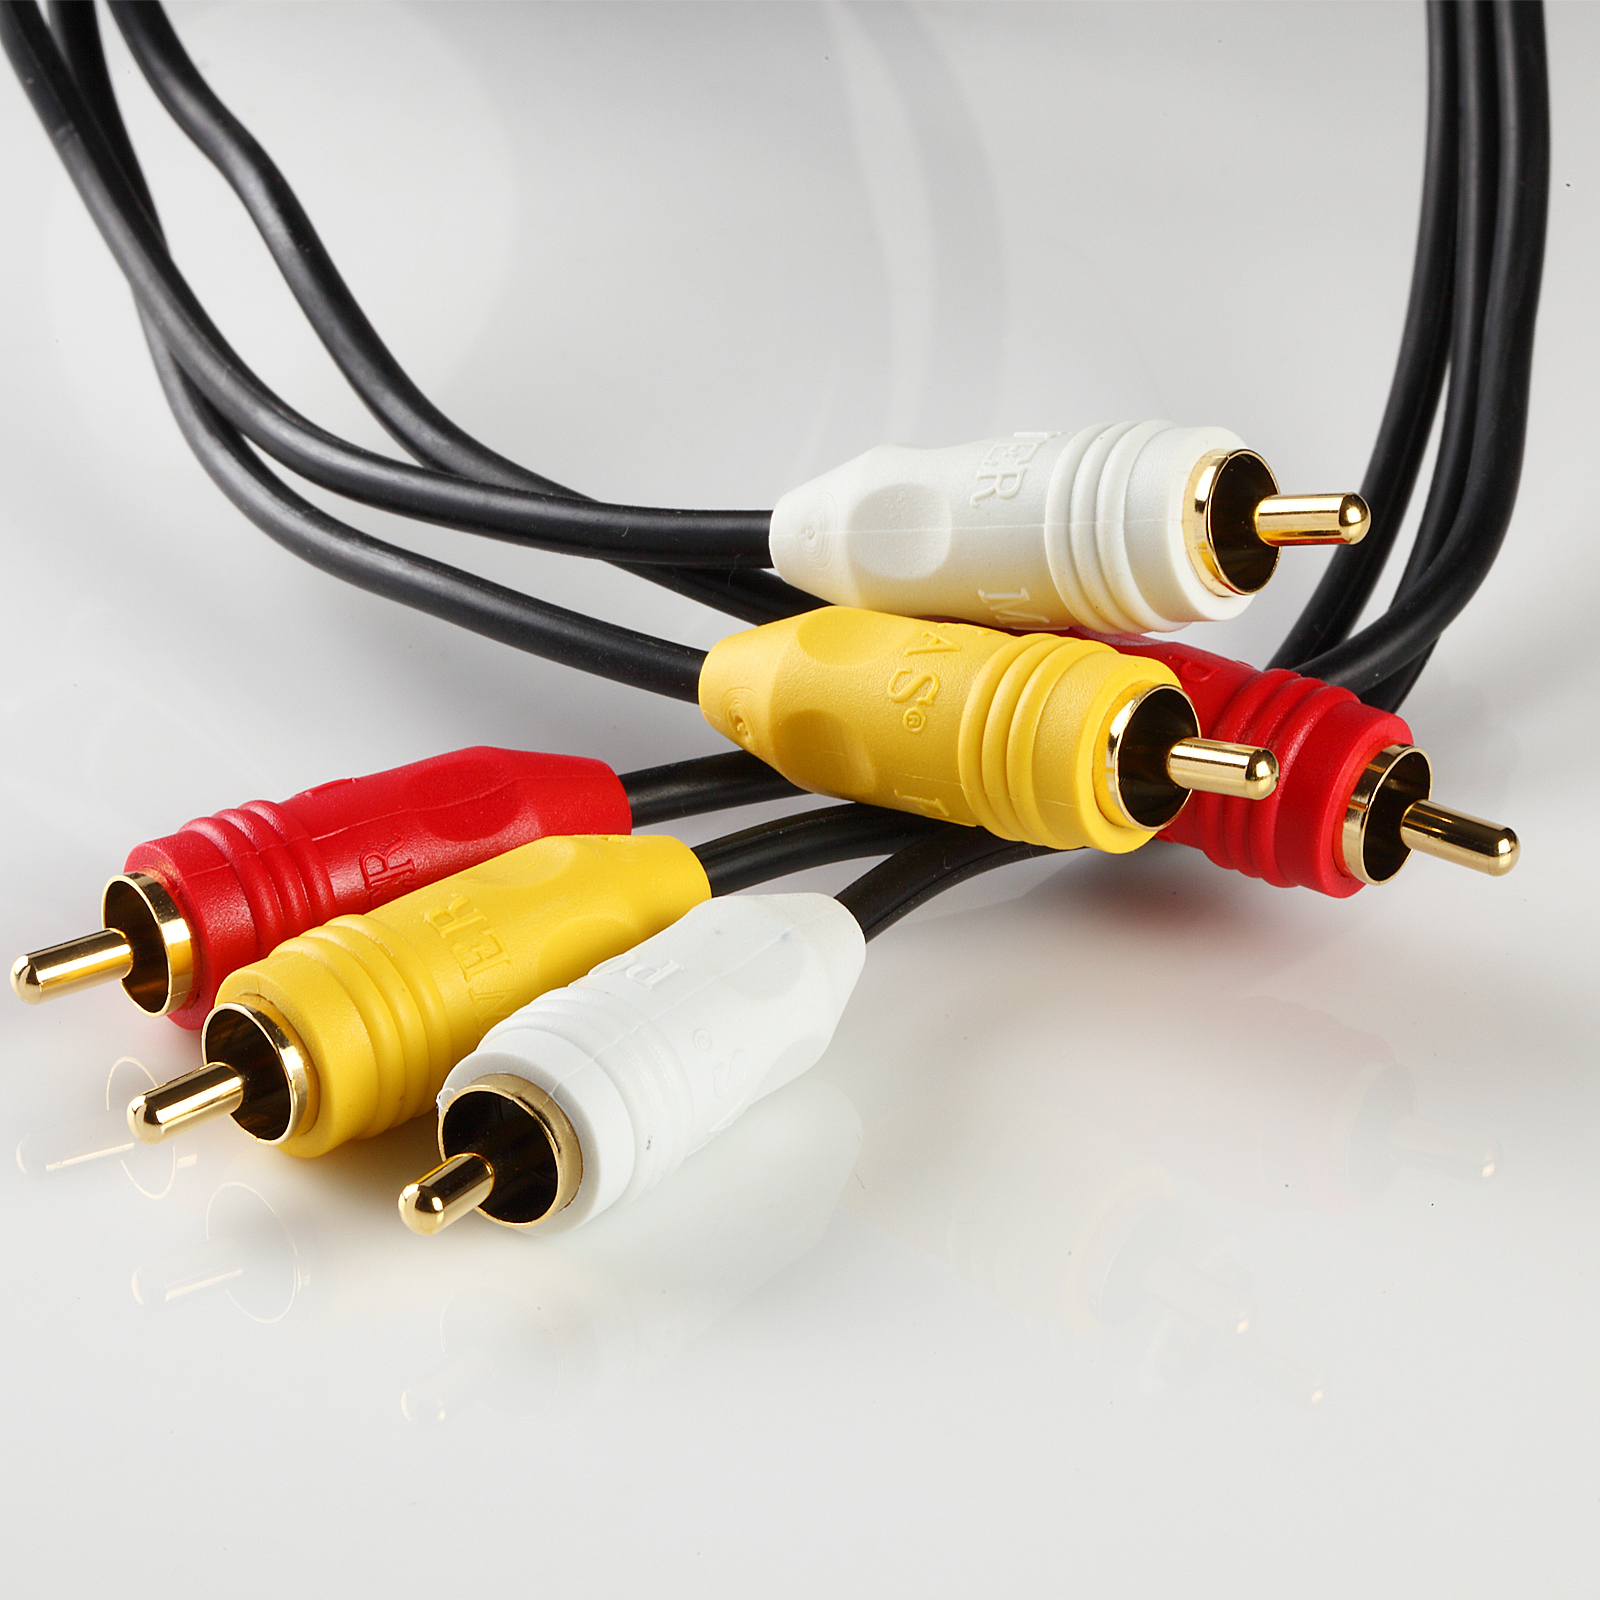 18ft Gold Plated 3 Rca Composite Av Audio Video Cable L R V Male To Male Ebay 5063